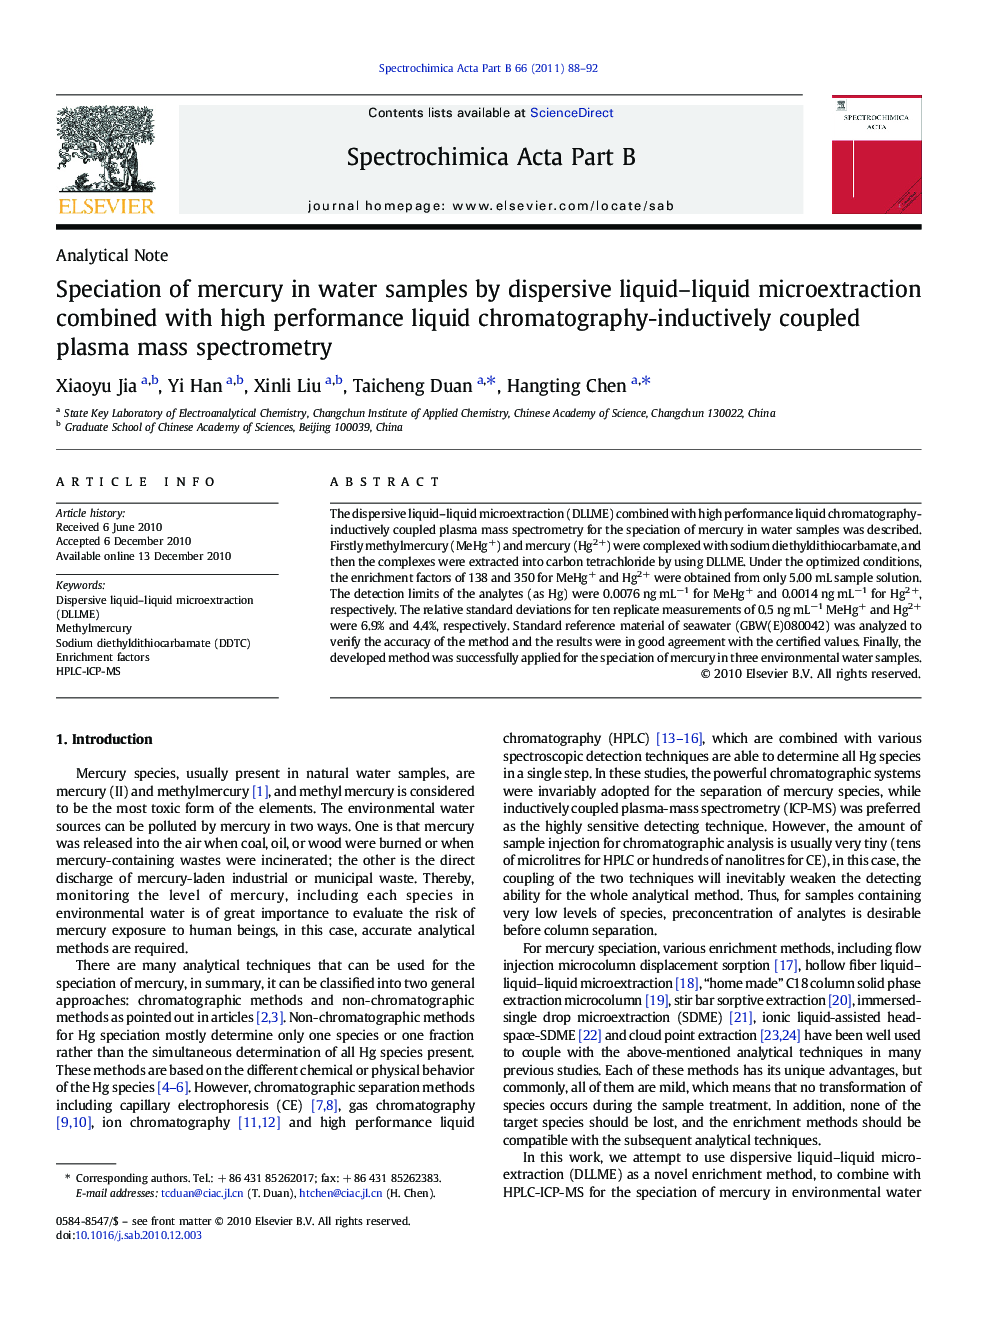 Speciation of mercury in water samples by dispersive liquid–liquid microextraction combined with high performance liquid chromatography-inductively coupled plasma mass spectrometry